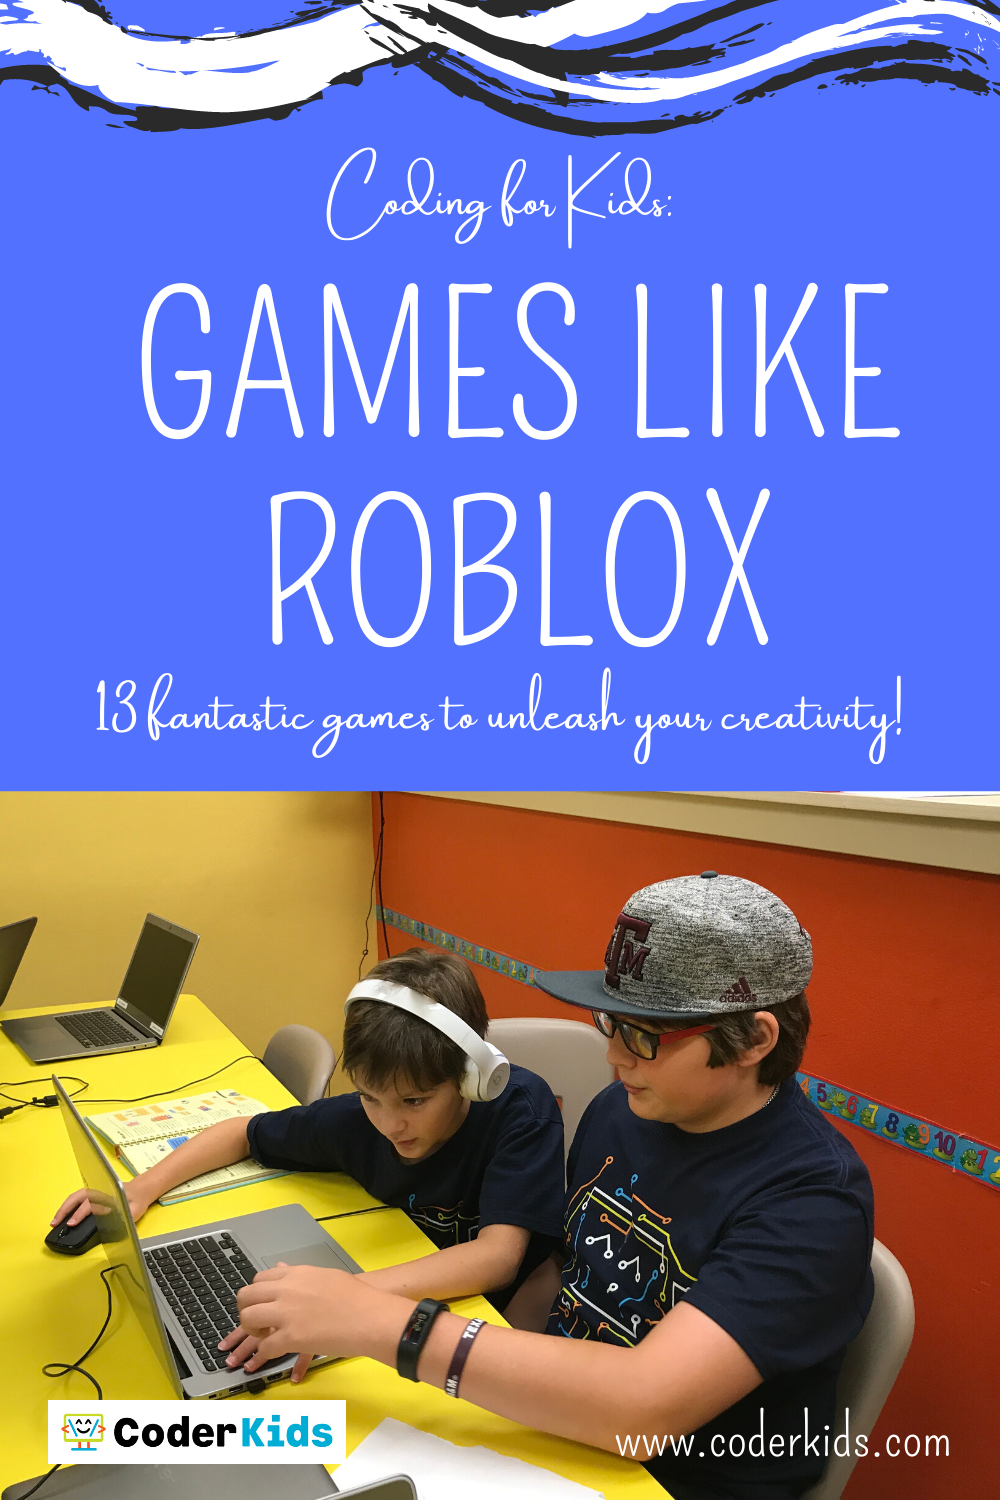 5 best fighting games to play with friends on Roblox